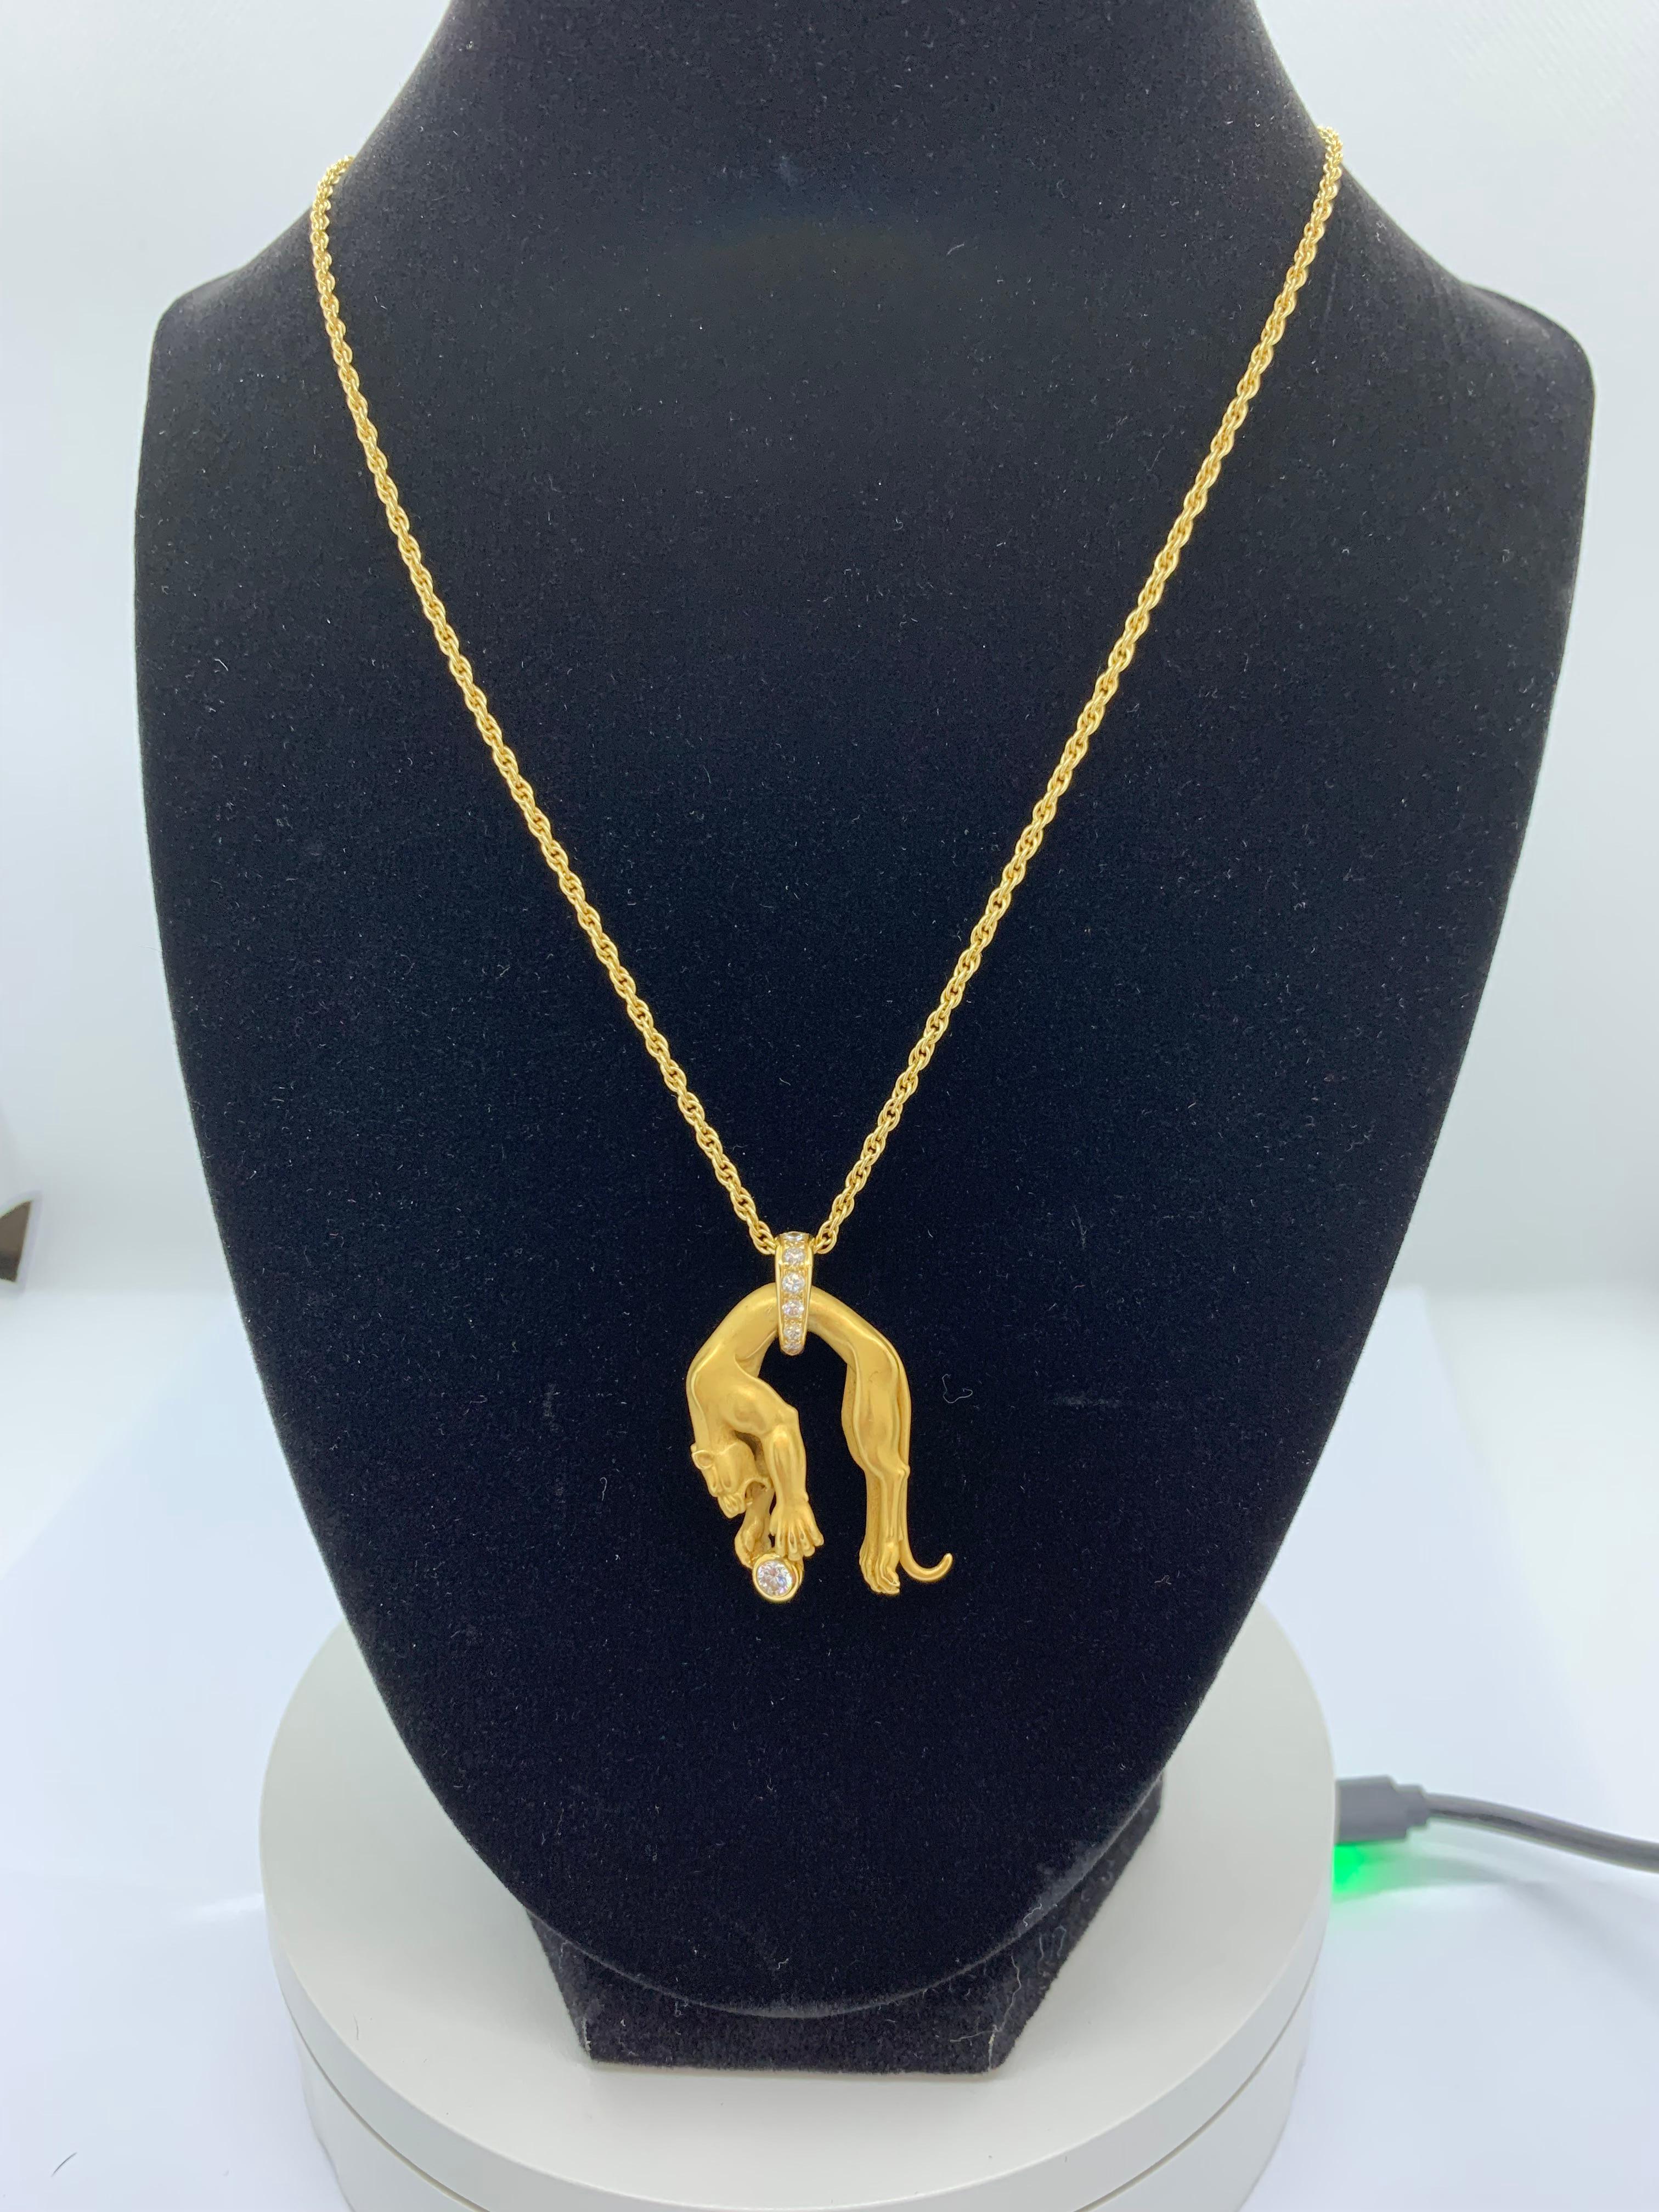 Mayors 18K gold large panther draped on diamond bail
Panther paws are hold round brilliant diamond weighing .25 carats
Six Round Diamonds on bail are pave set weighing .15 carats 
Includes 18K yellow gold 16 inch rope style chain with clasp marked